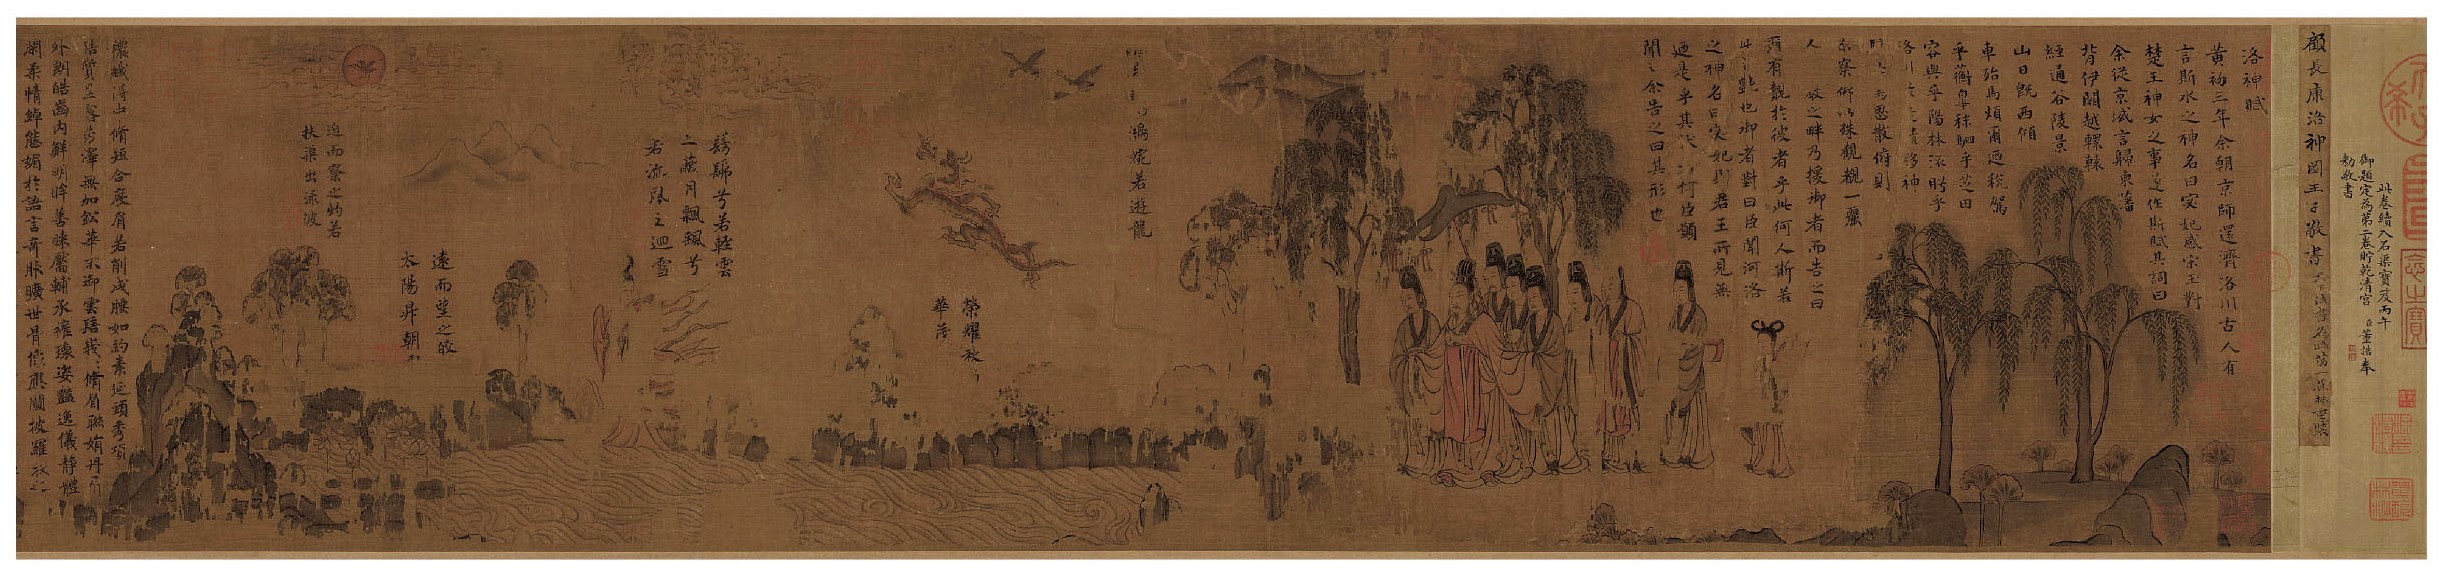 File B Gu Kaizhi Nymph Of The Luo River Section Southern Song Copy Liaoning Provincial Museum Jpg 维基百科 自由的百科全书